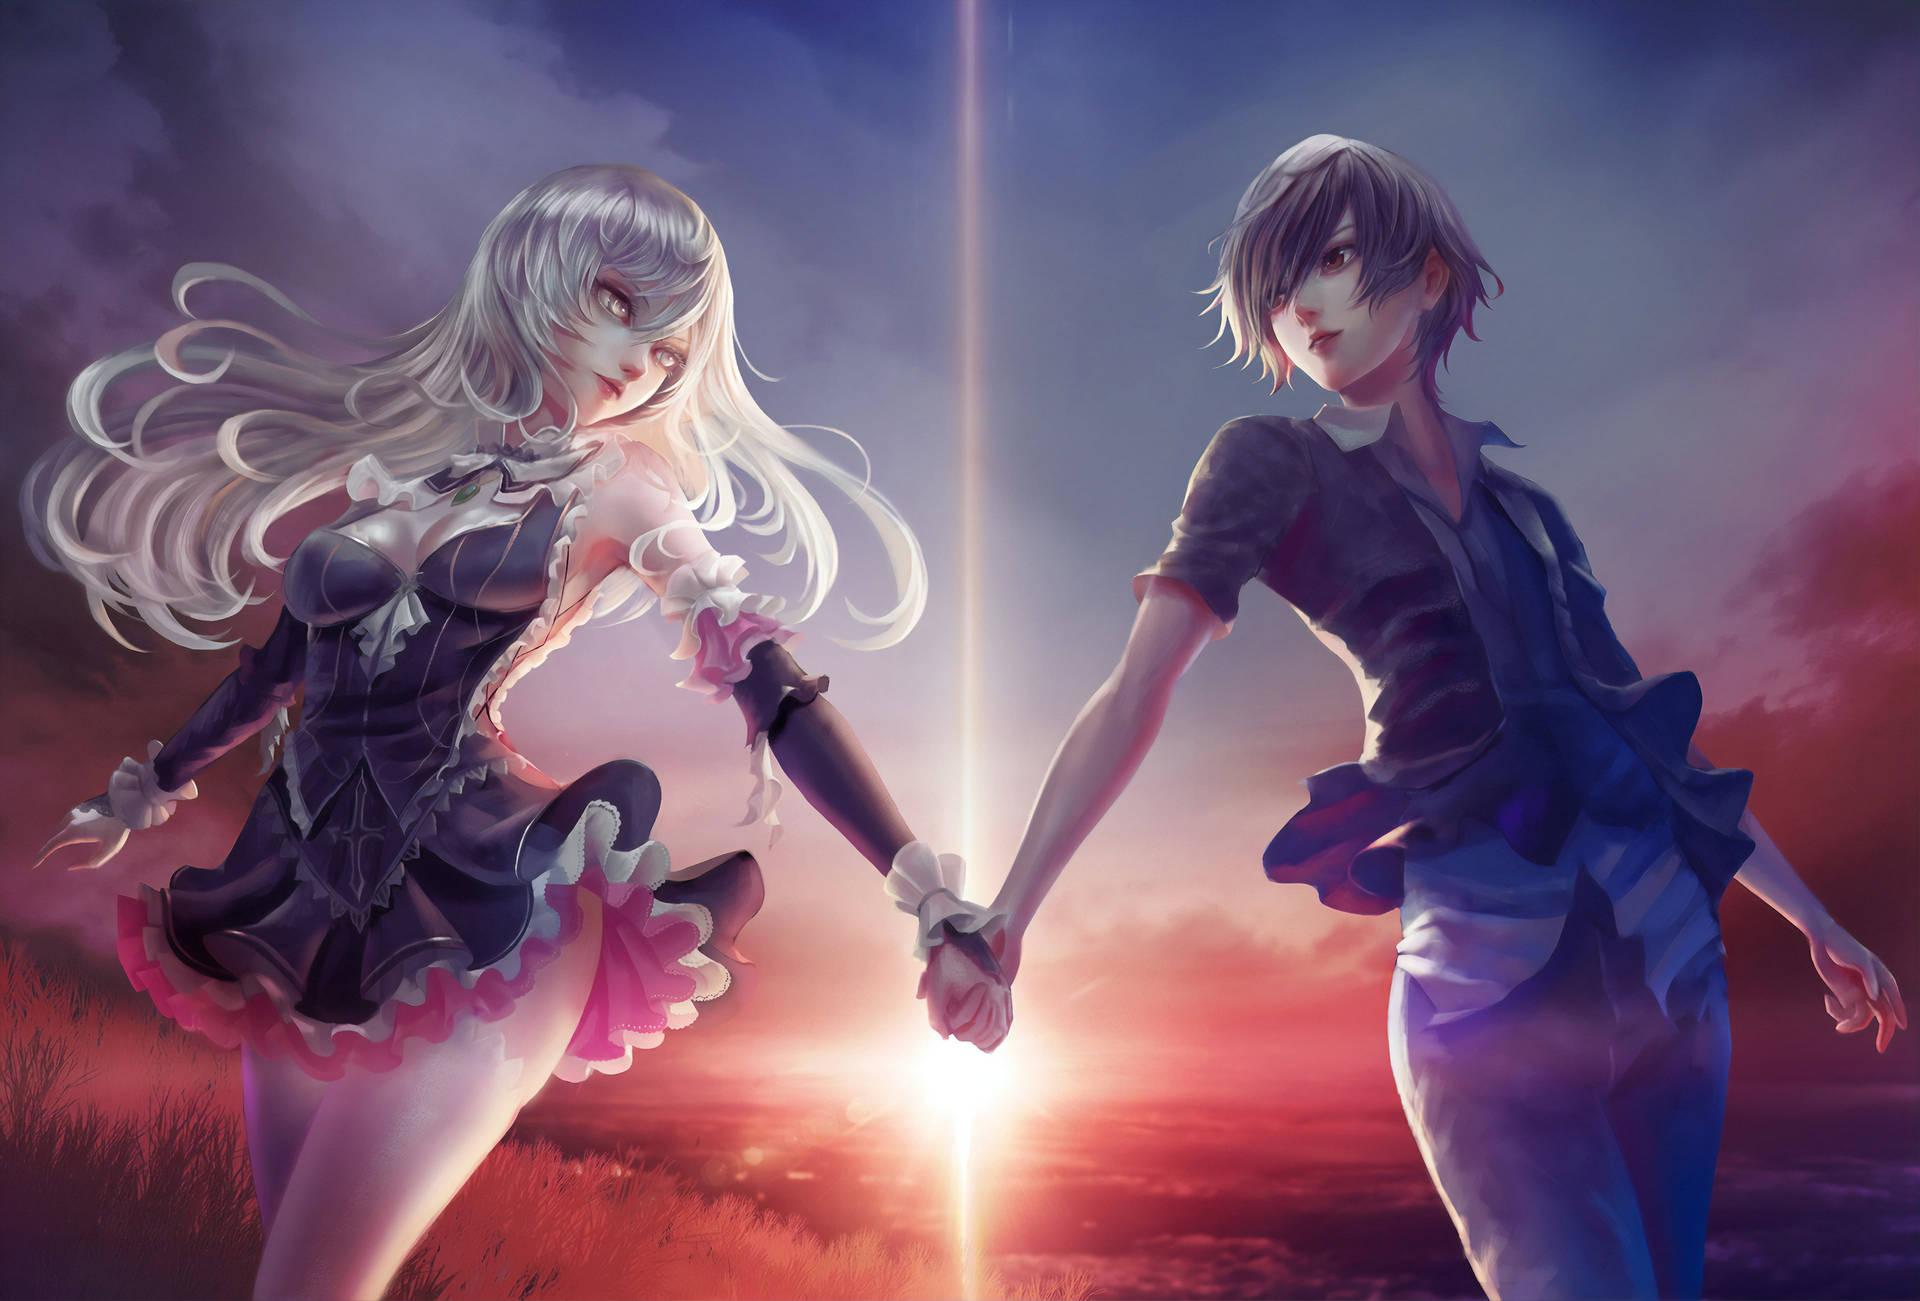 Top 999+ Aesthetic Anime Couple Wallpapers Full HD, 4K Free to Use